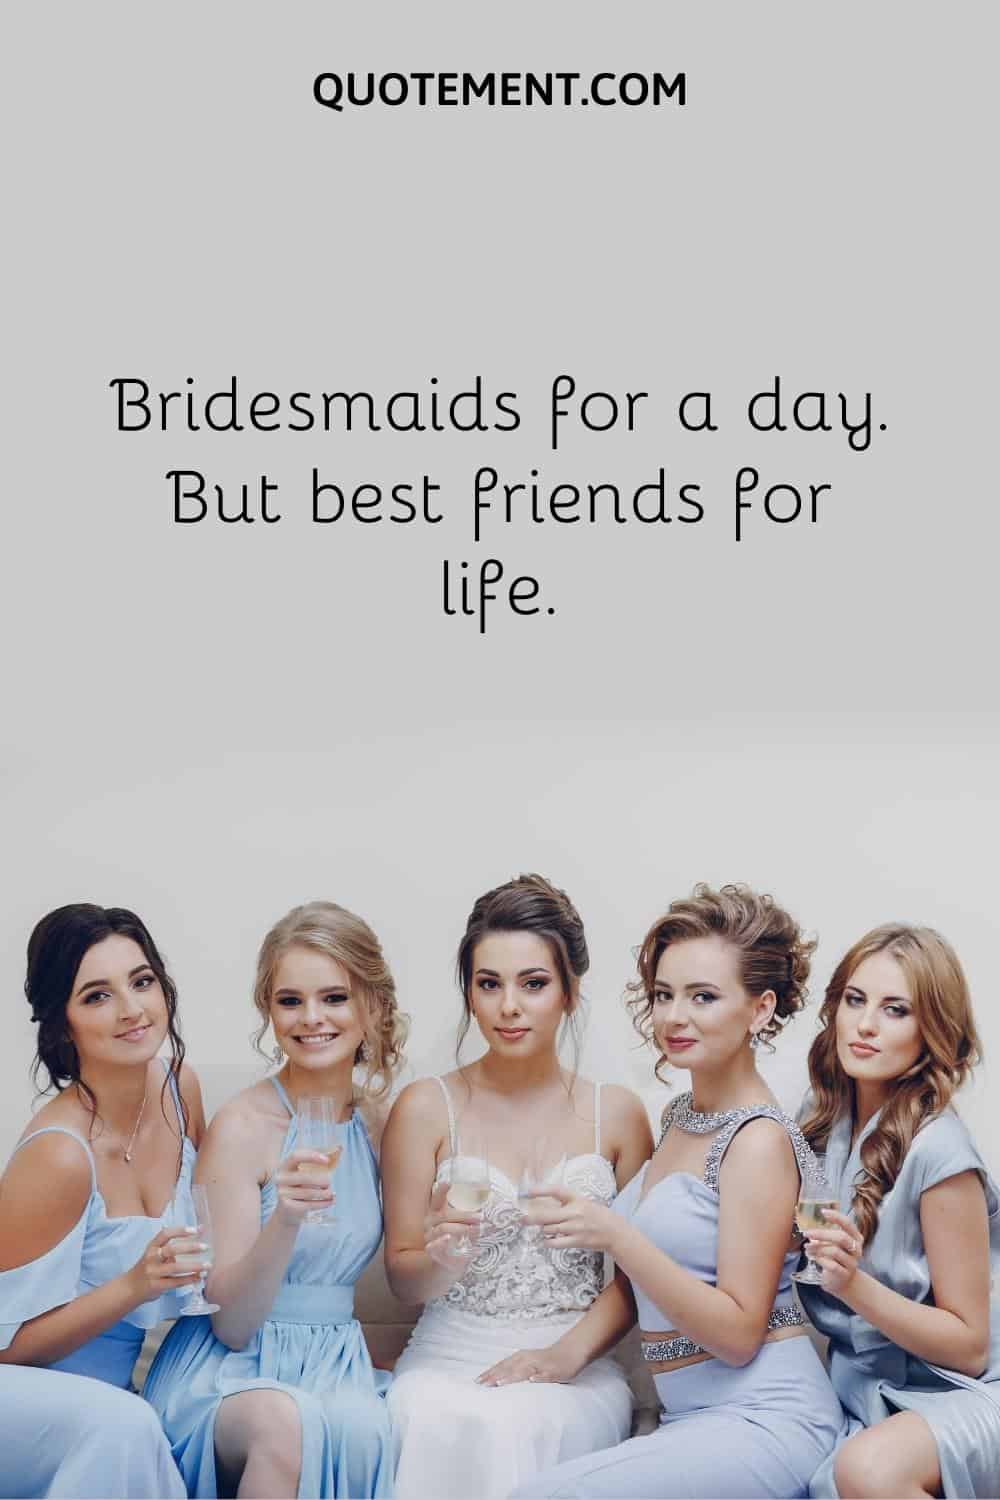 Bridesmaids for a day. But best friends for life.